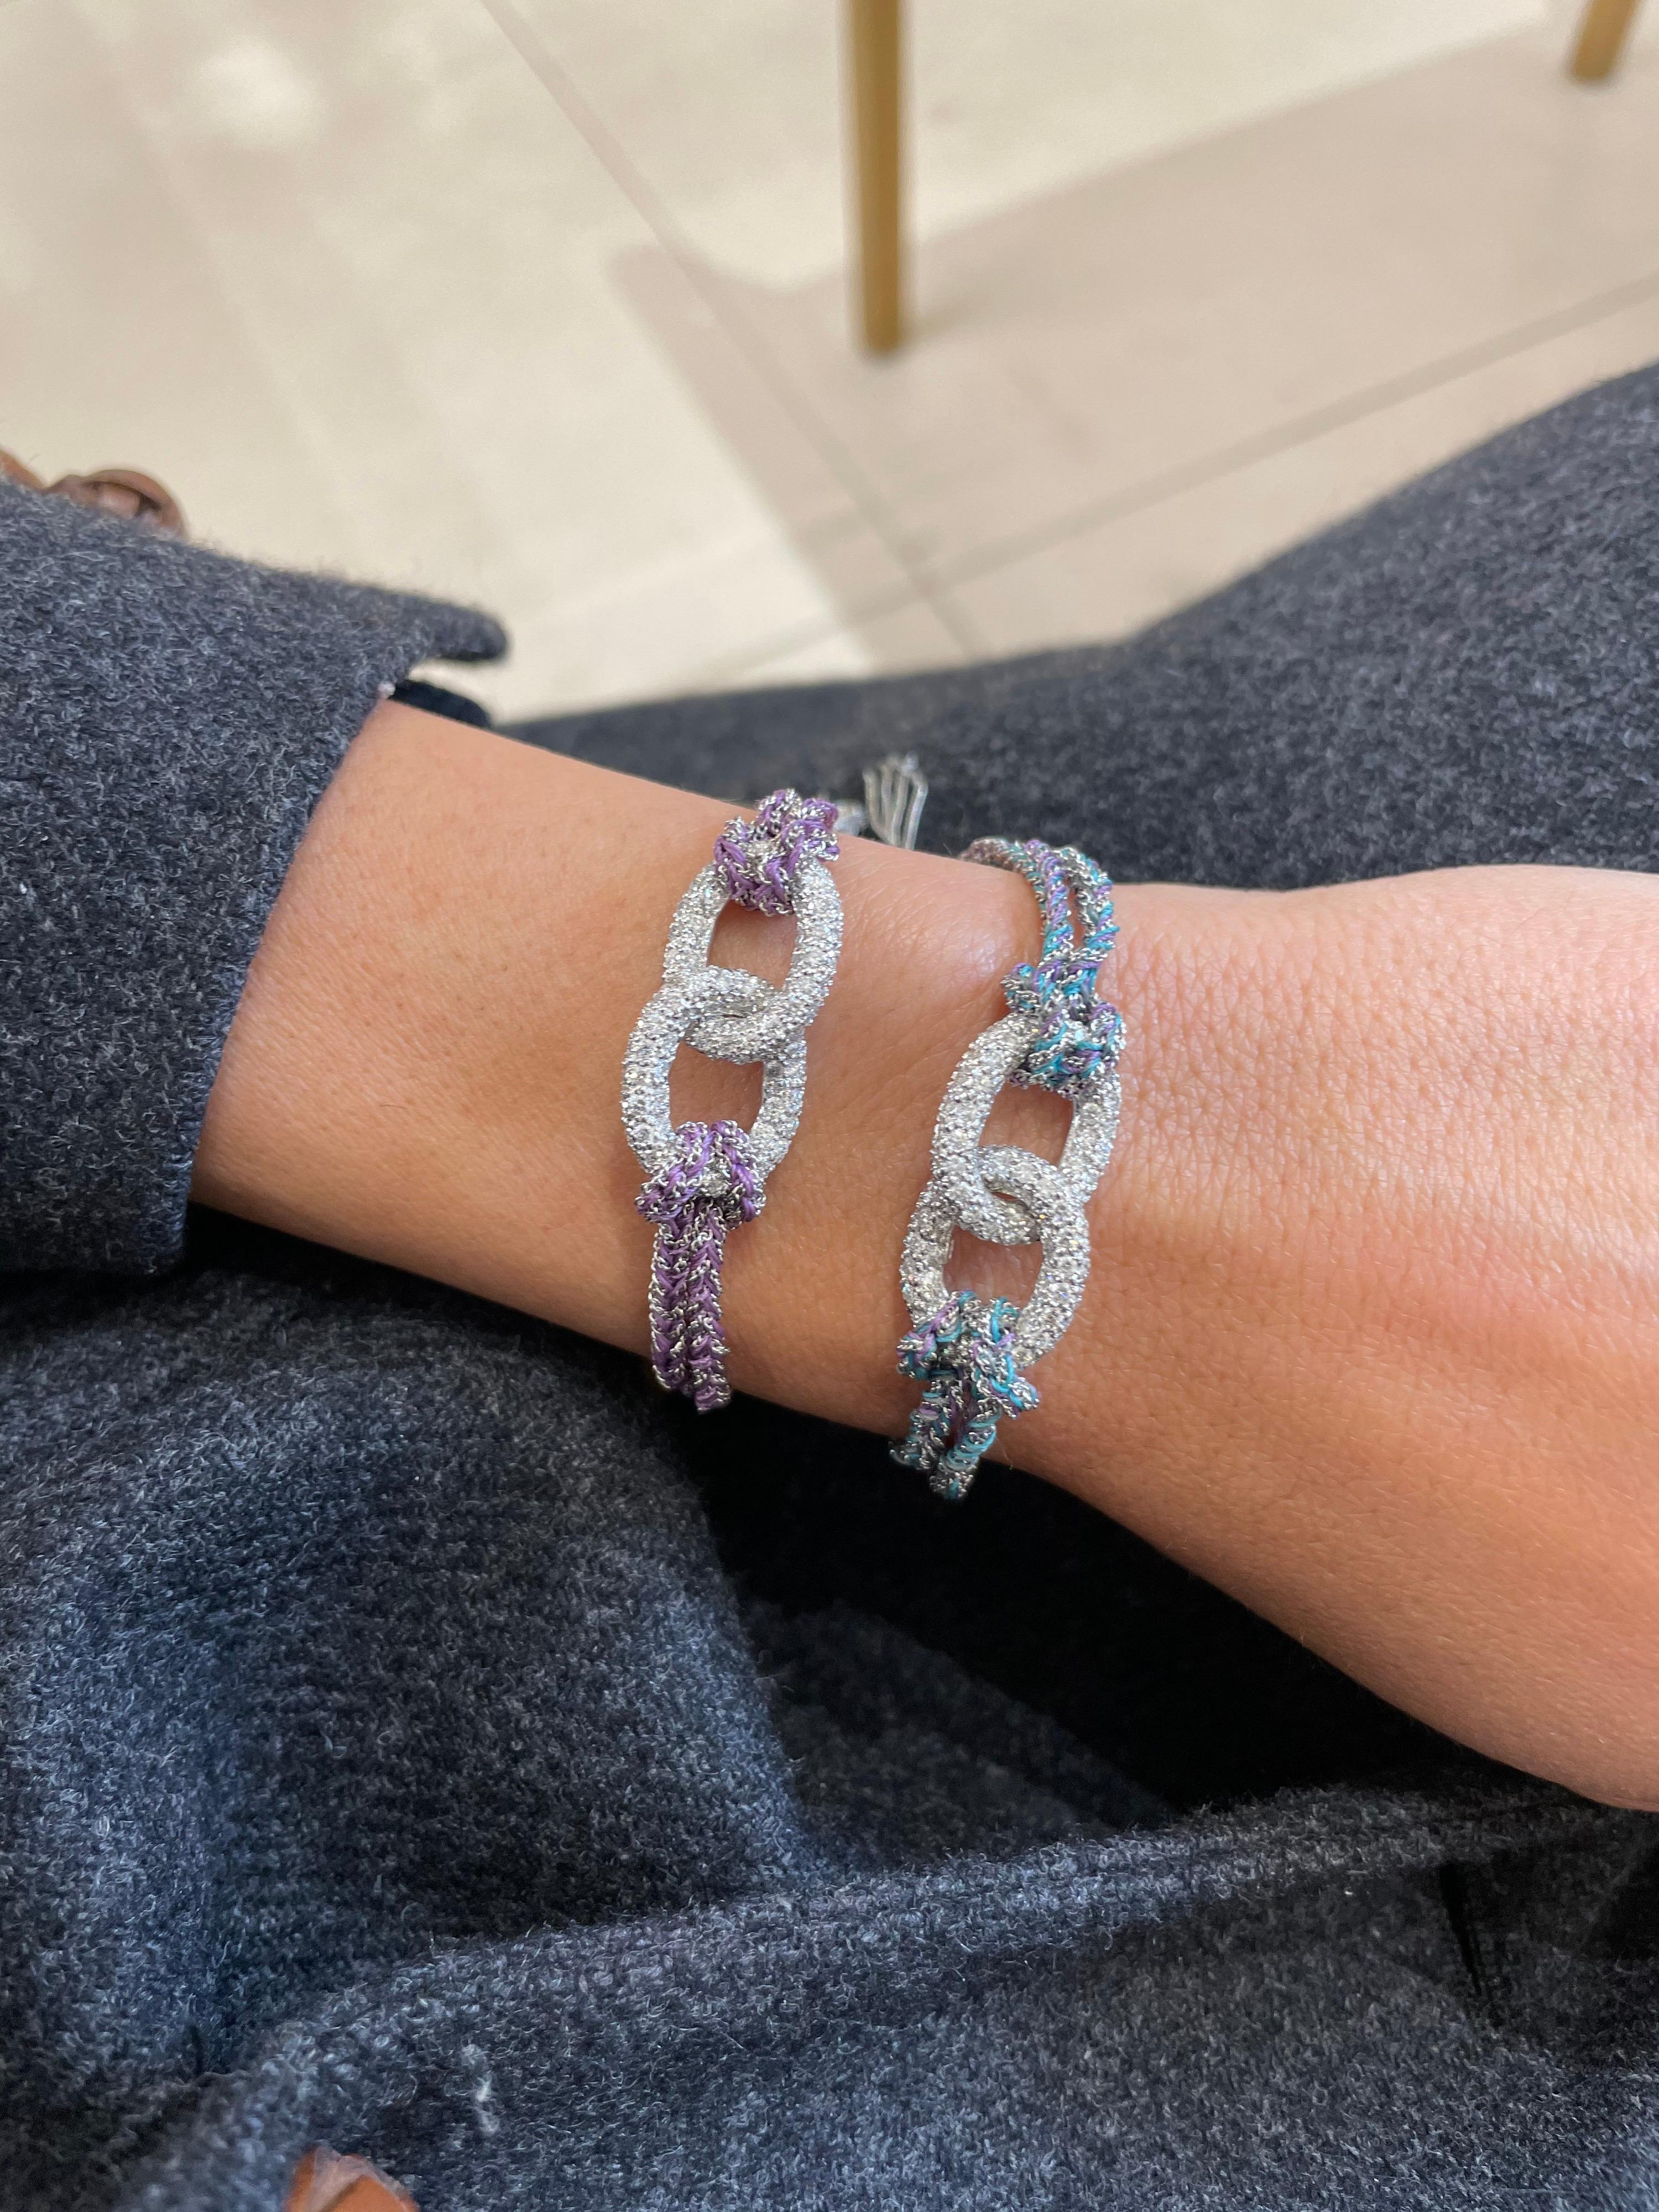 Carolina Bucci makes inspiring, distinctive jewellery designed with a reverence for craftsmanship and executed with elegance.
Two white diamond pavé links are shown here combined with two Intuition Lucky Bracelets. The 18k white gold diamond-cut